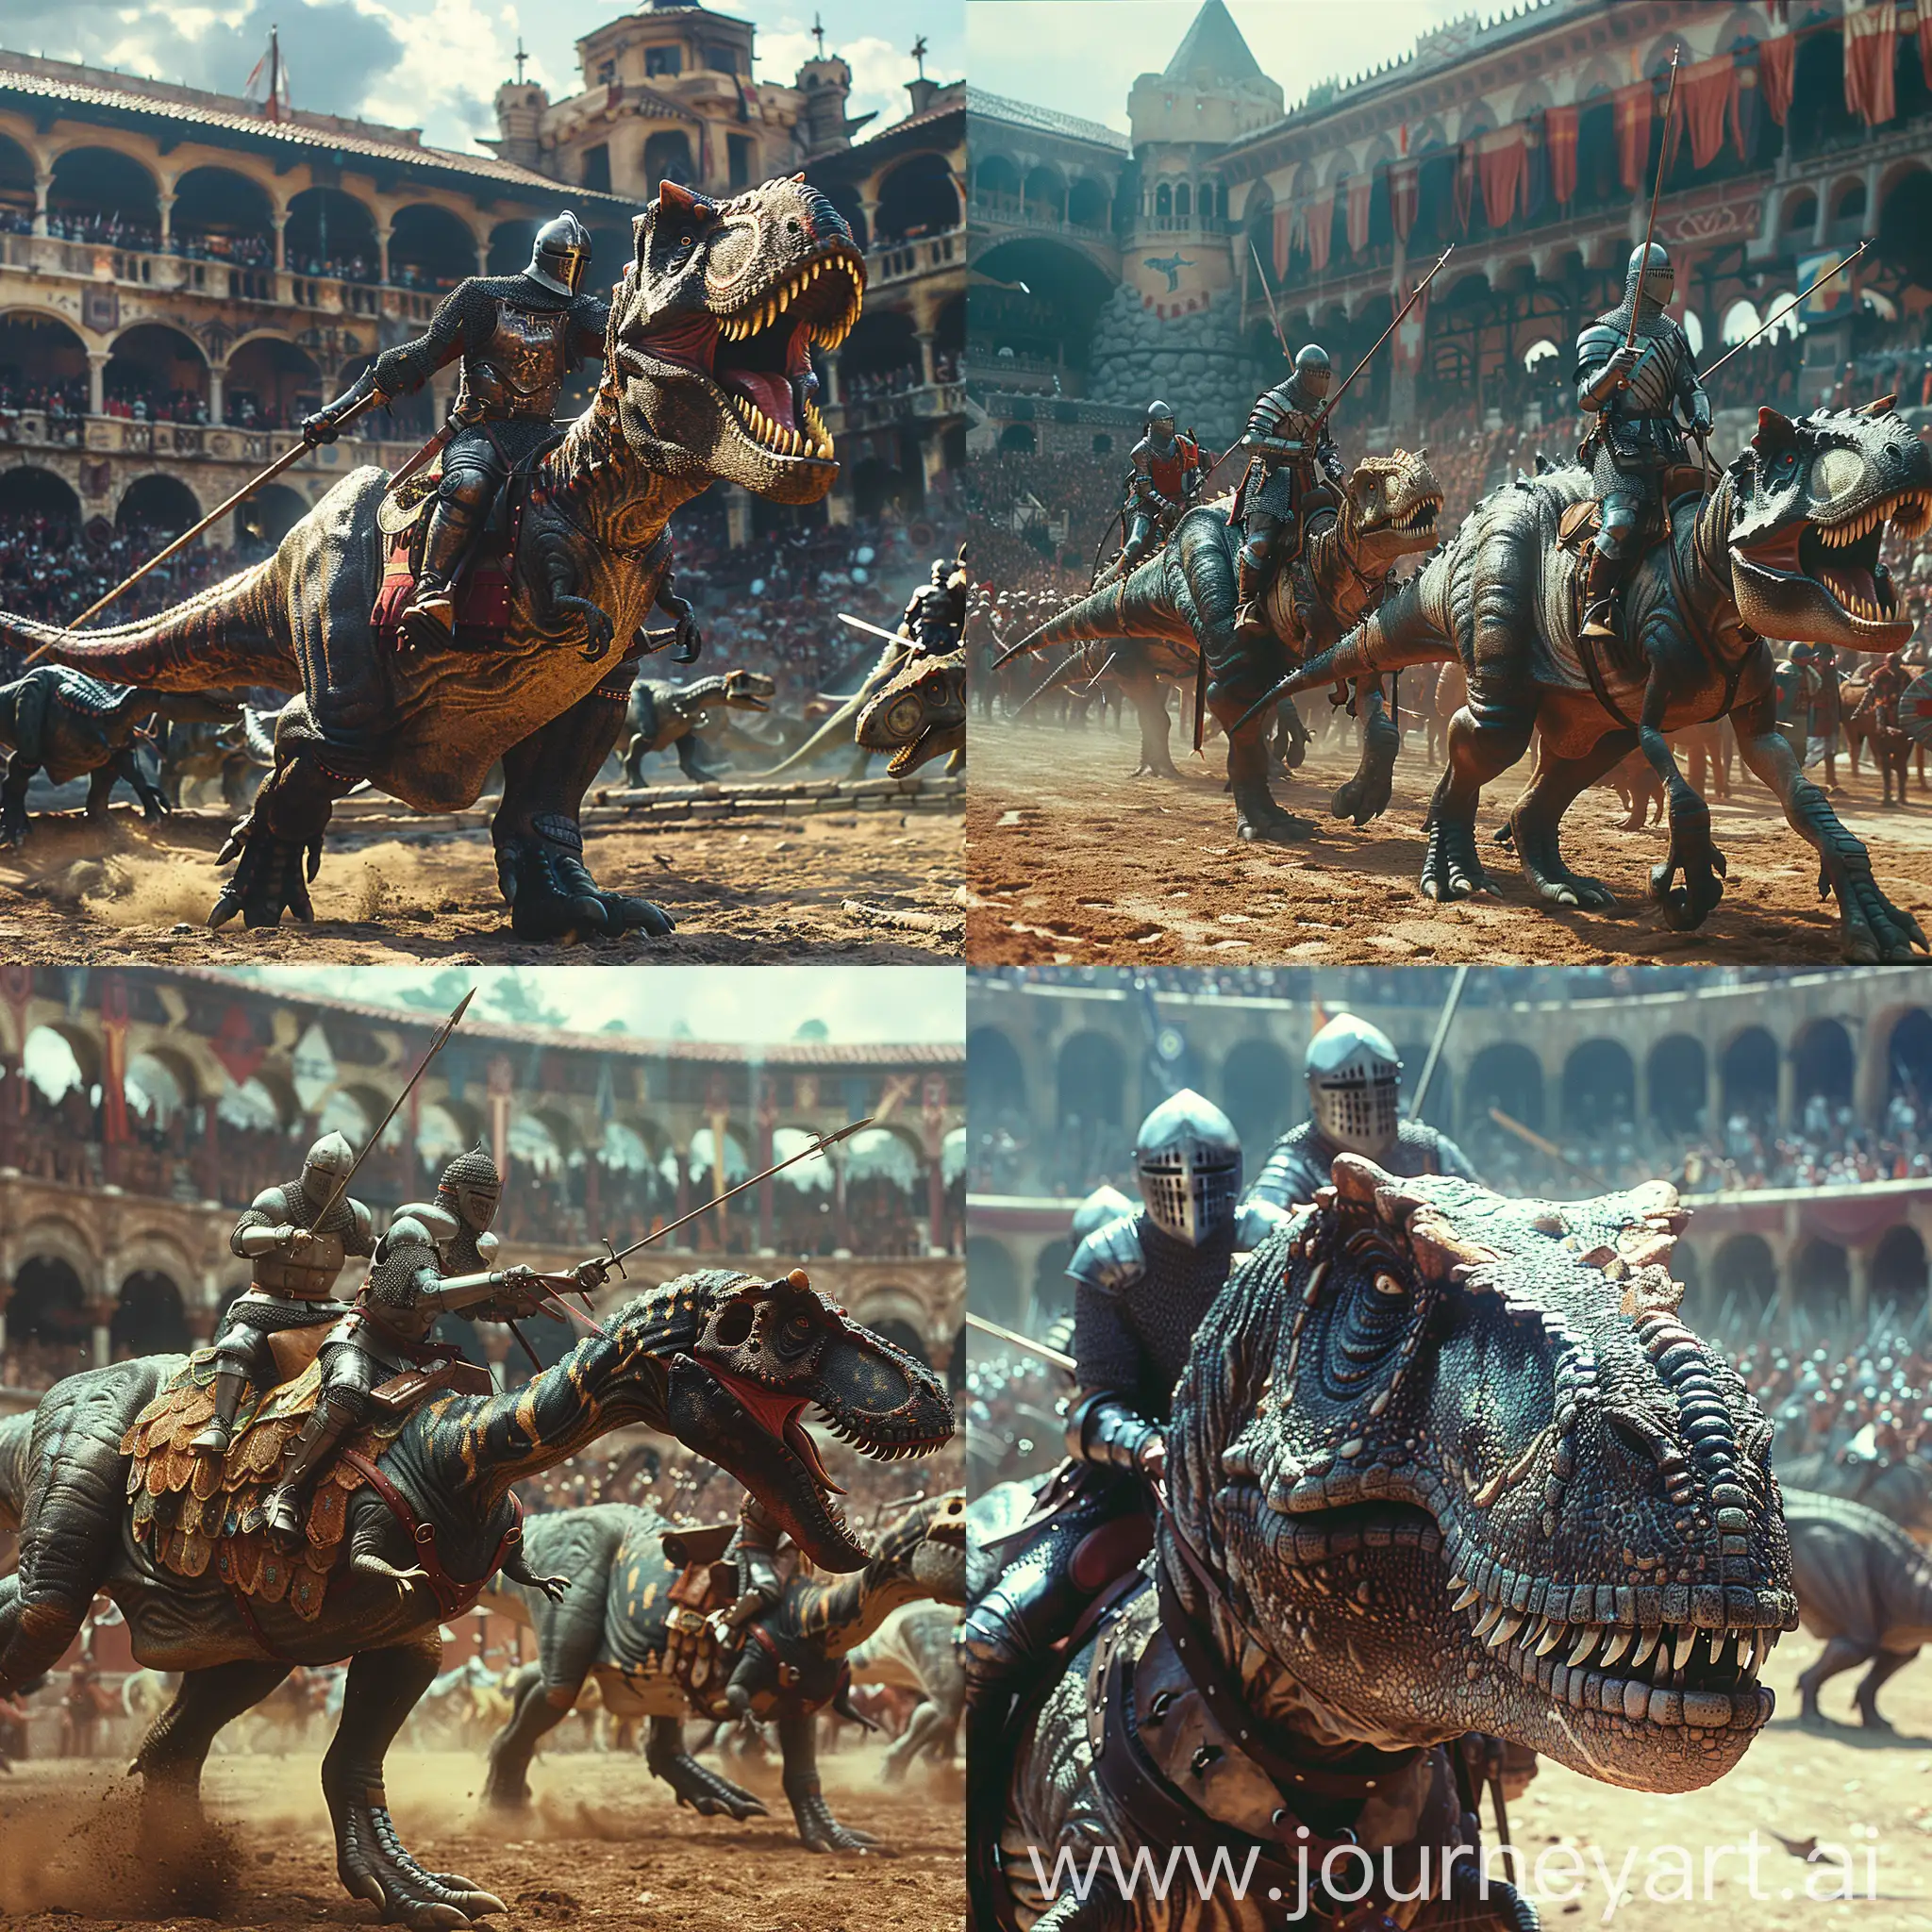 Cinematic, historical fantasy photography, medieval knights jousting atop mighty dinosaurs instead of horses, an anachronistic blend of prehistoric creatures and medieval chivalry, vividly capturing the clash of lances in a dynamic, high-energy scene, with the grandeur of a medieval tournament and the primal ferocity of the dinosaurs, richly detailed armor and scales, set in an expansive, open arena, conveying a sense of awe and excitement. —v 6 —s 750